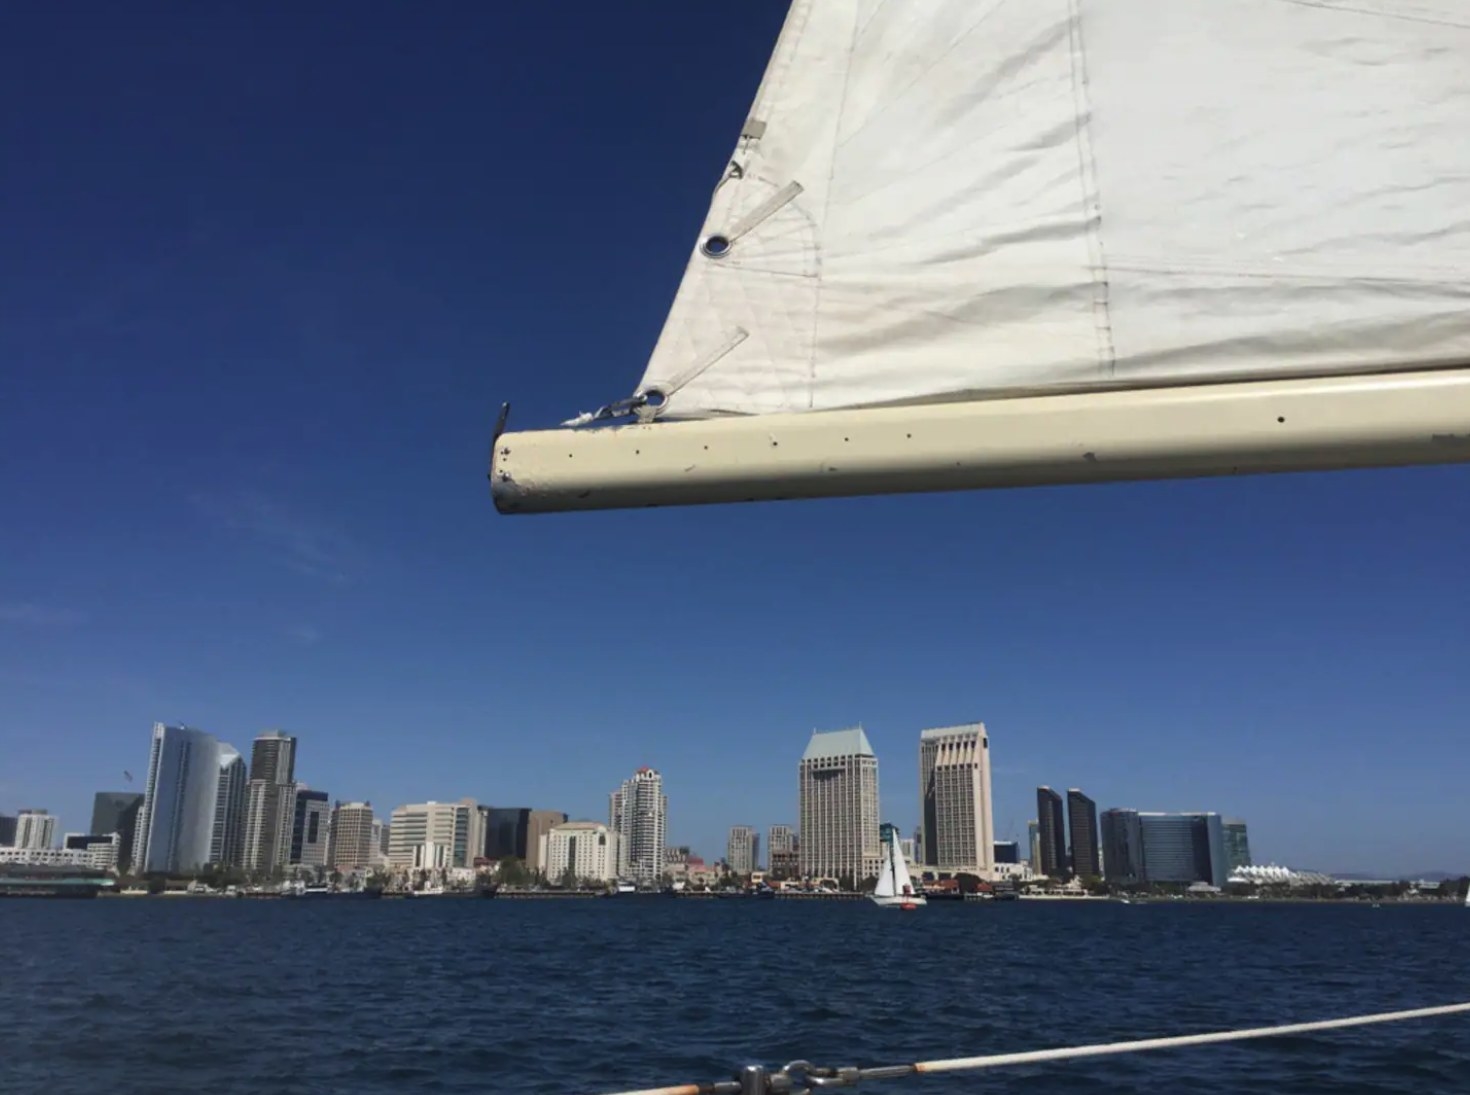 View of San Diego from a boat